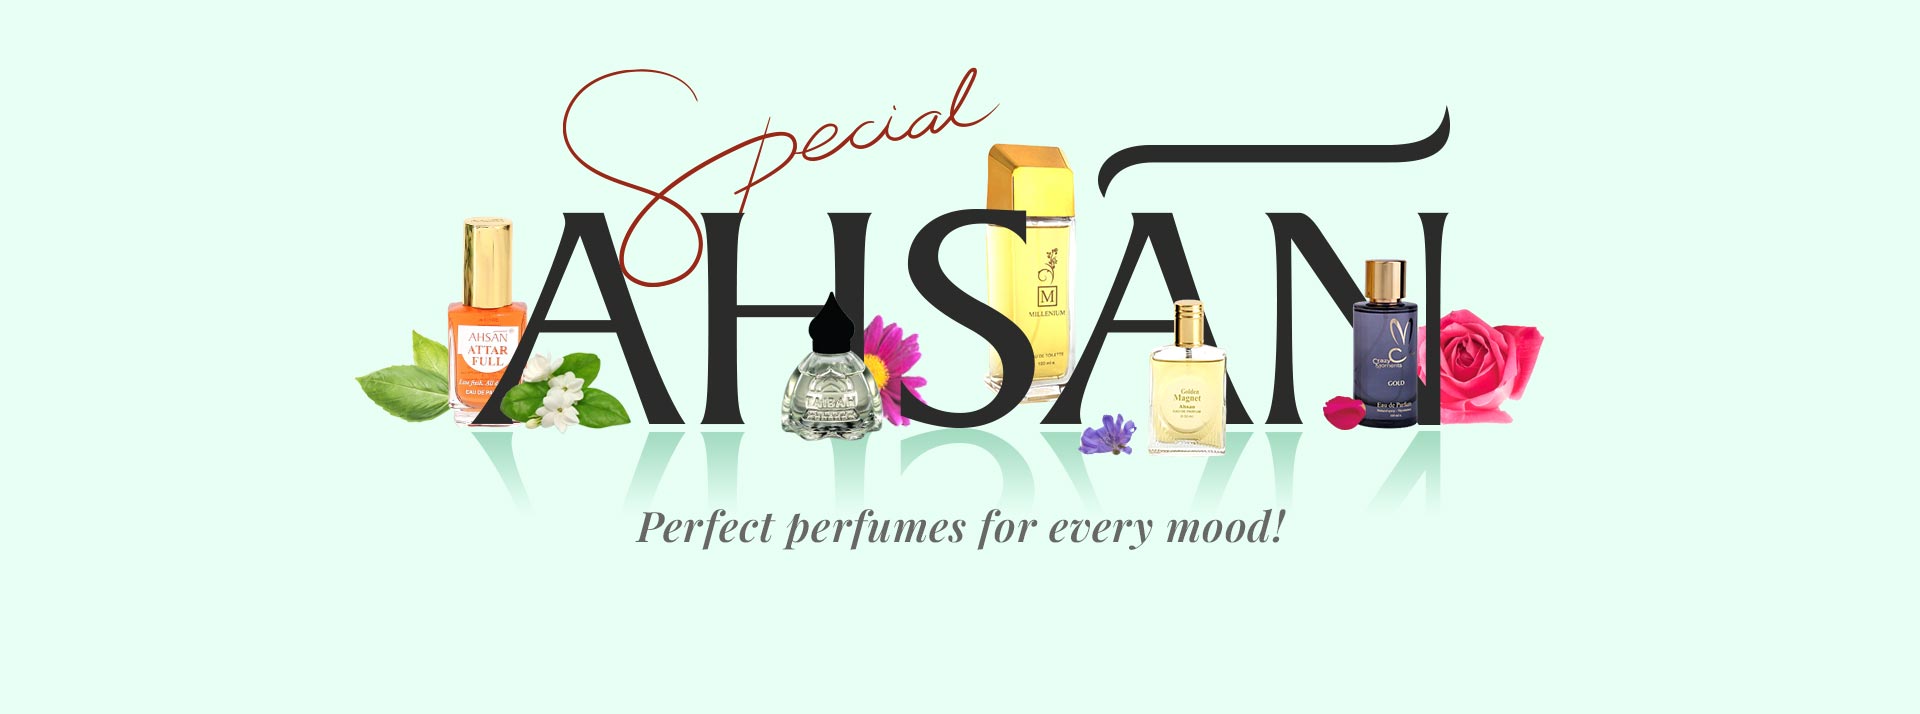 ahsan-collections-collage-v2